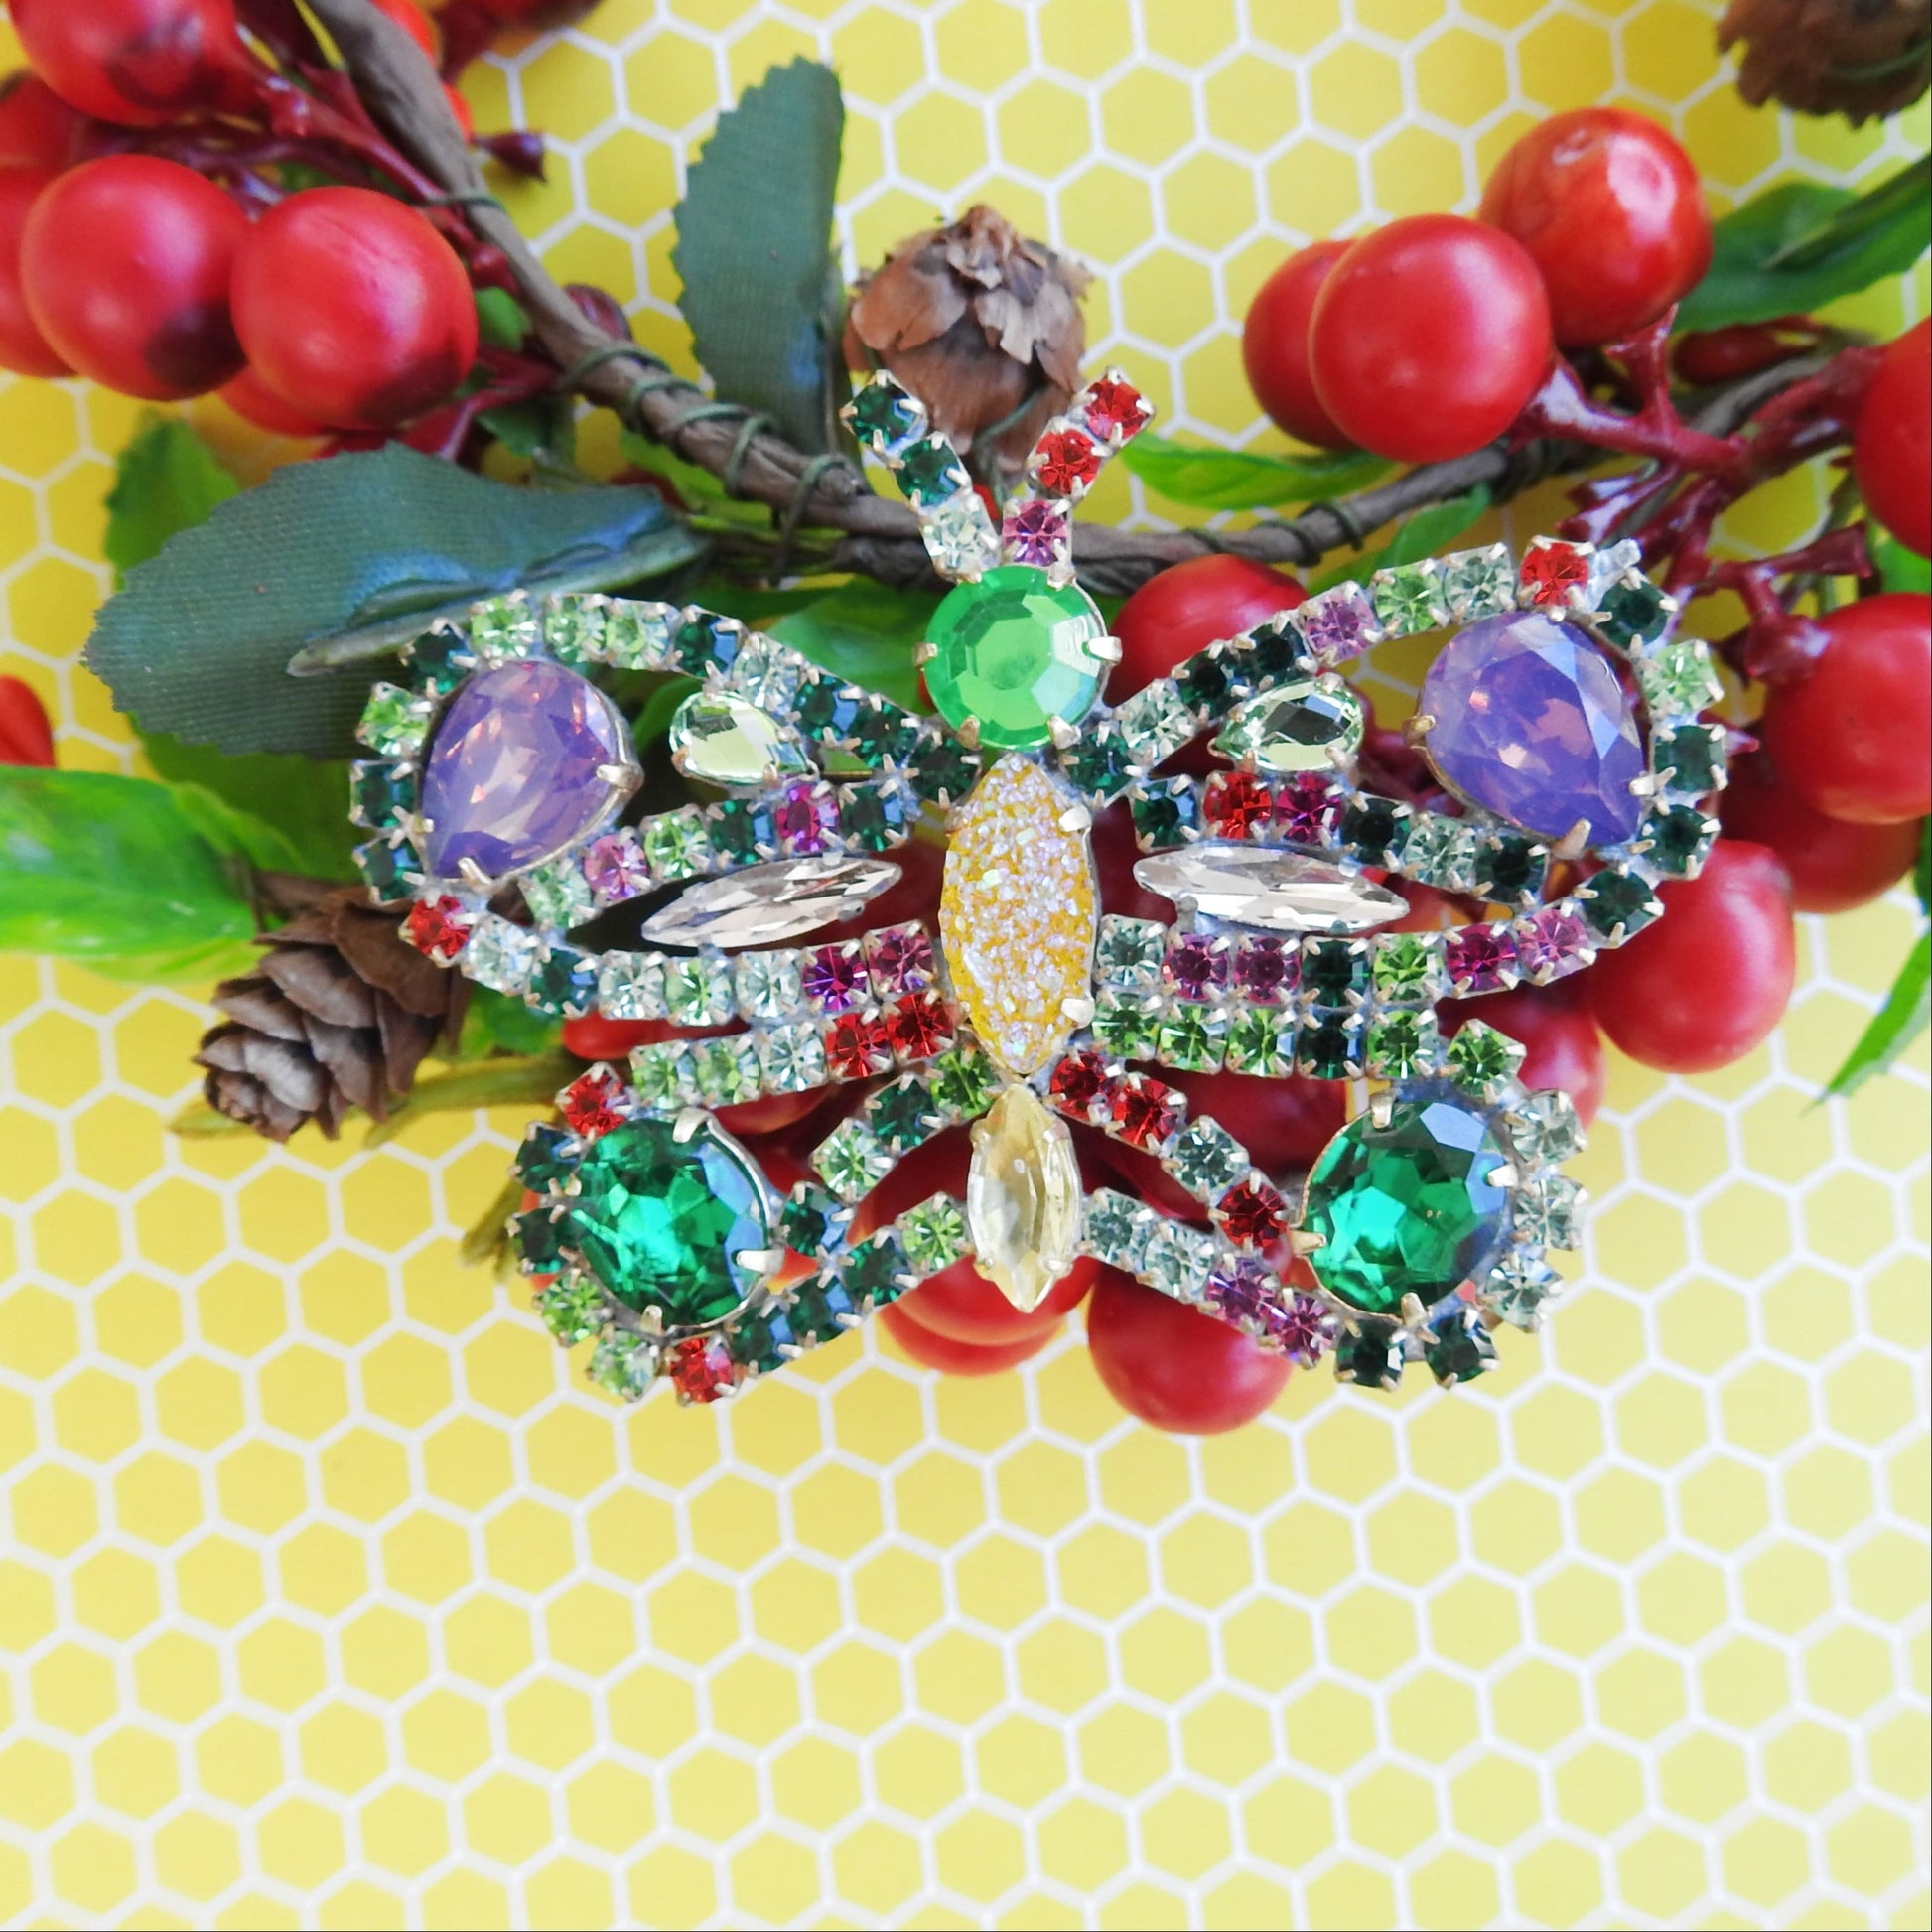 Iridescent Rhinestone Brooch, made from vintage Czech glass. green insect jewelry for women. Bumblebee Insect Anniversary Gift for her